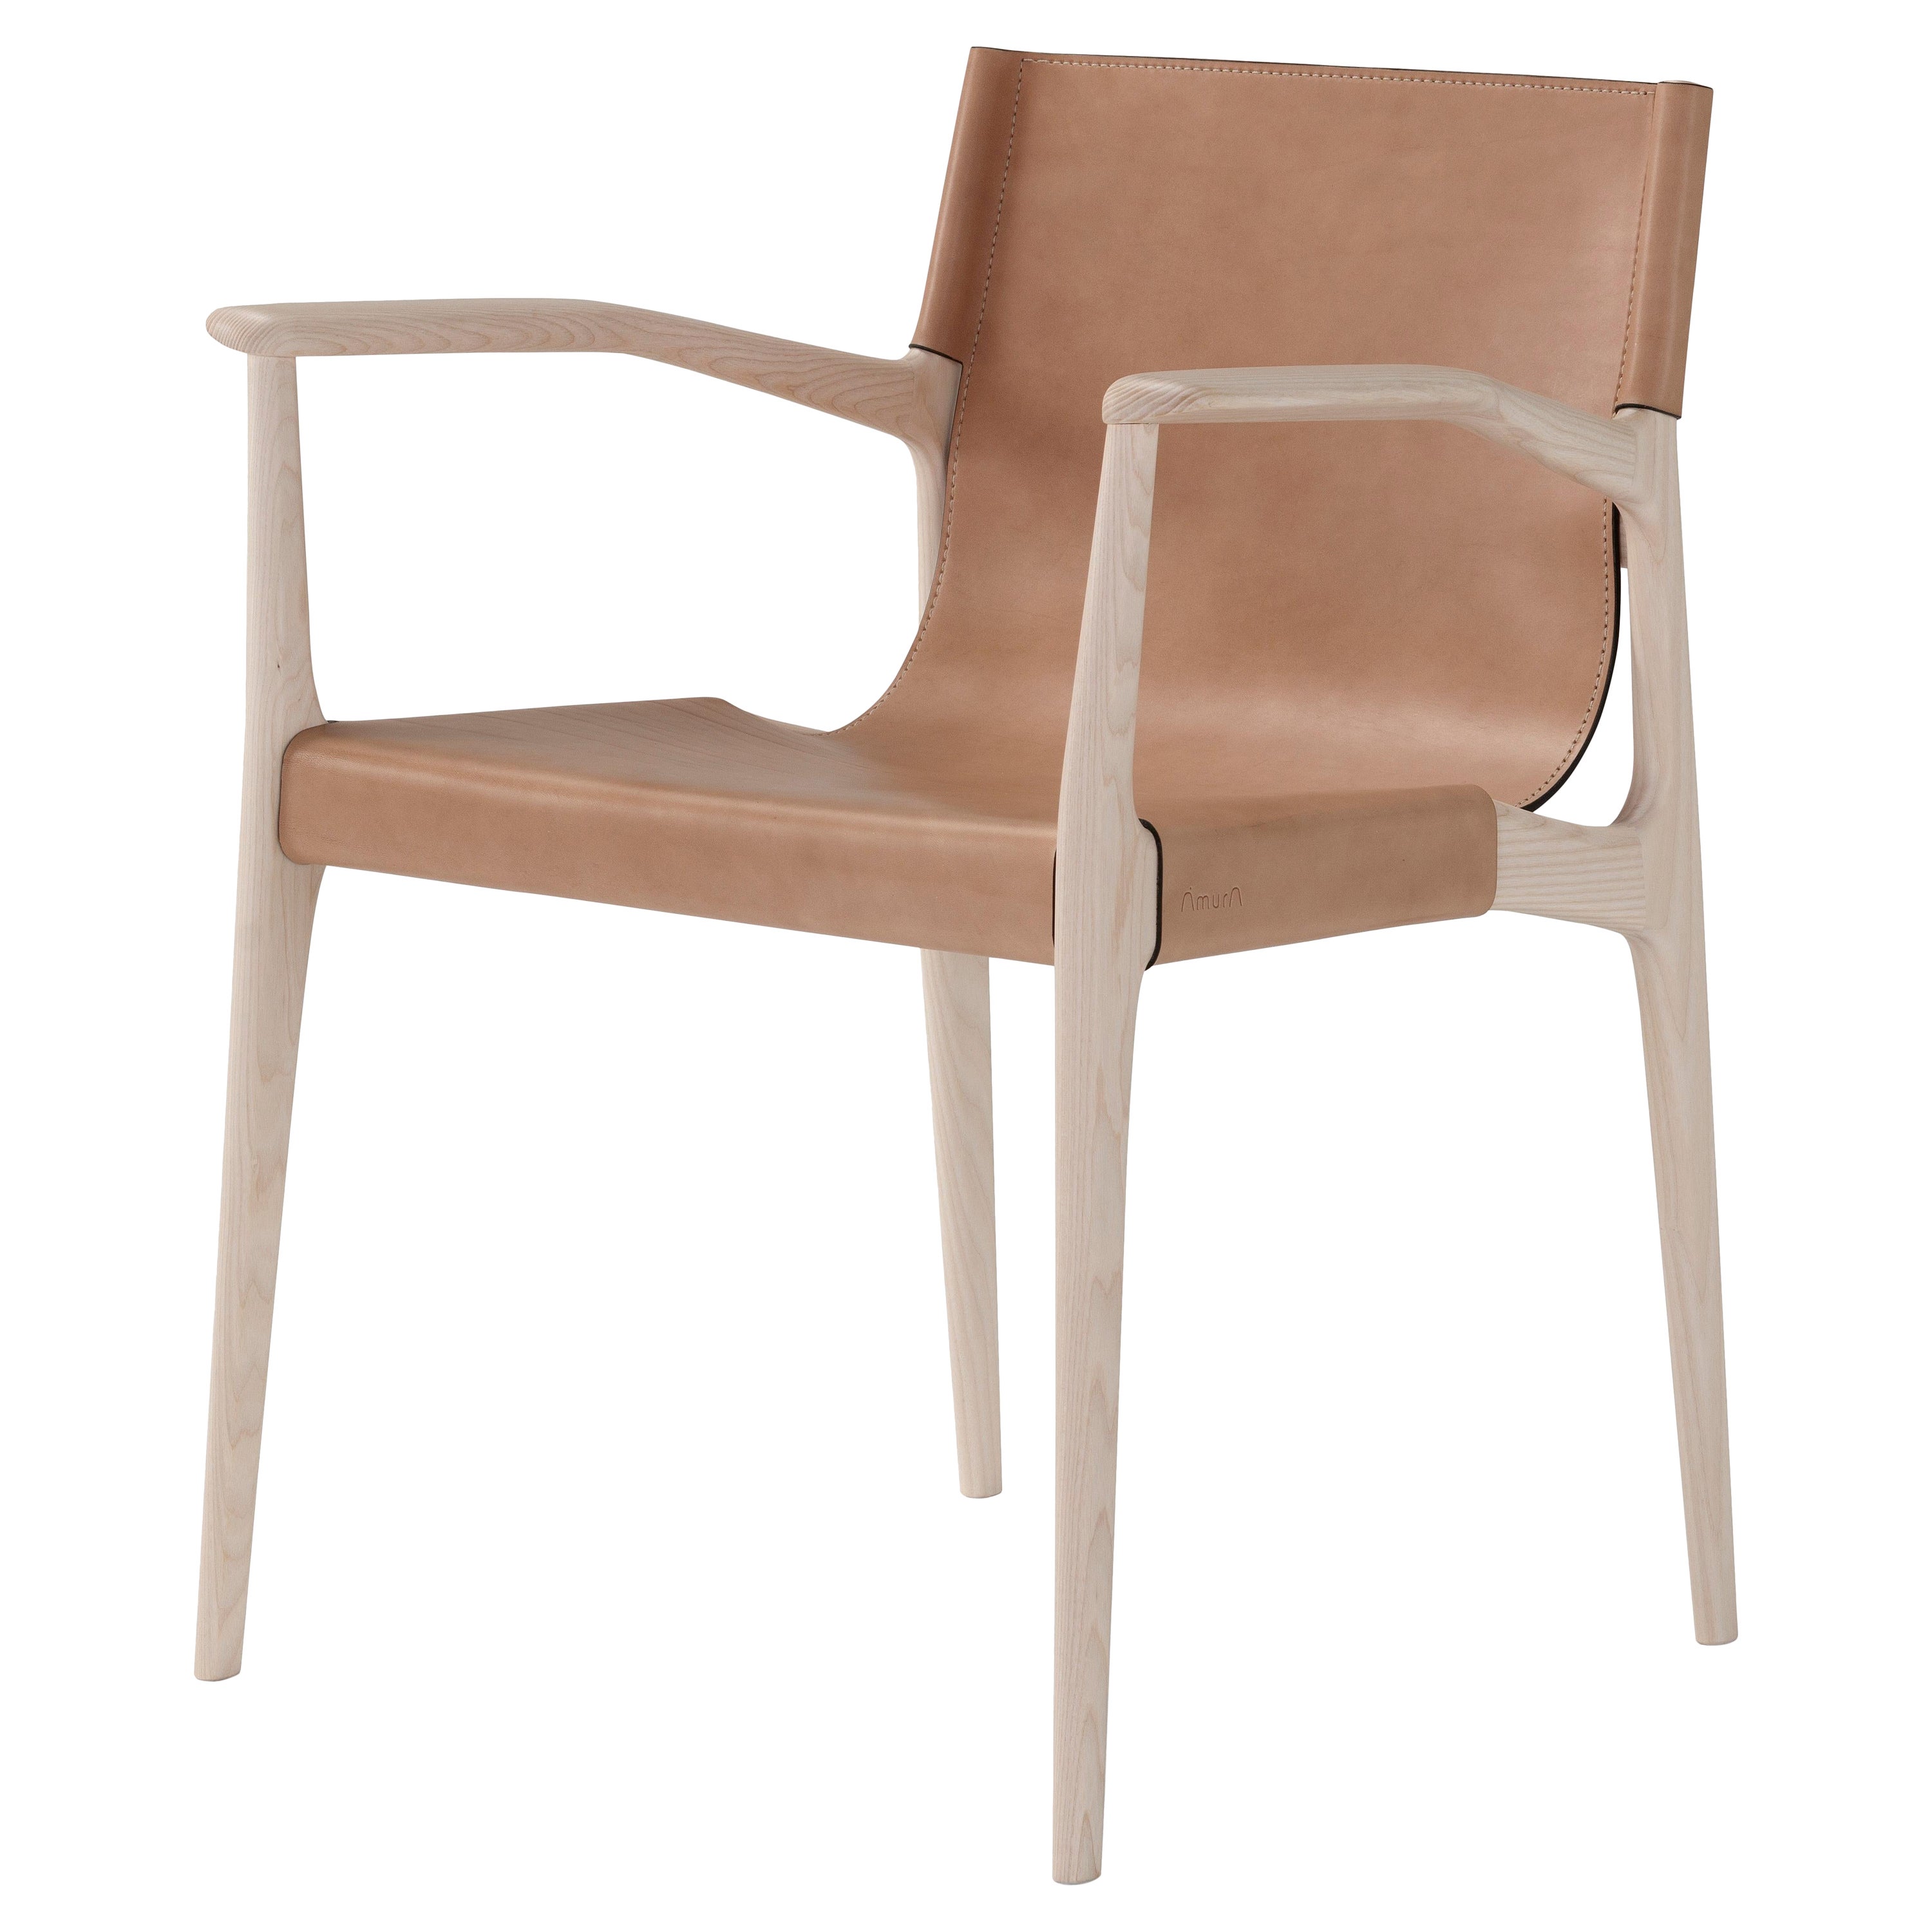 Tessa Chair with Arms For Sale